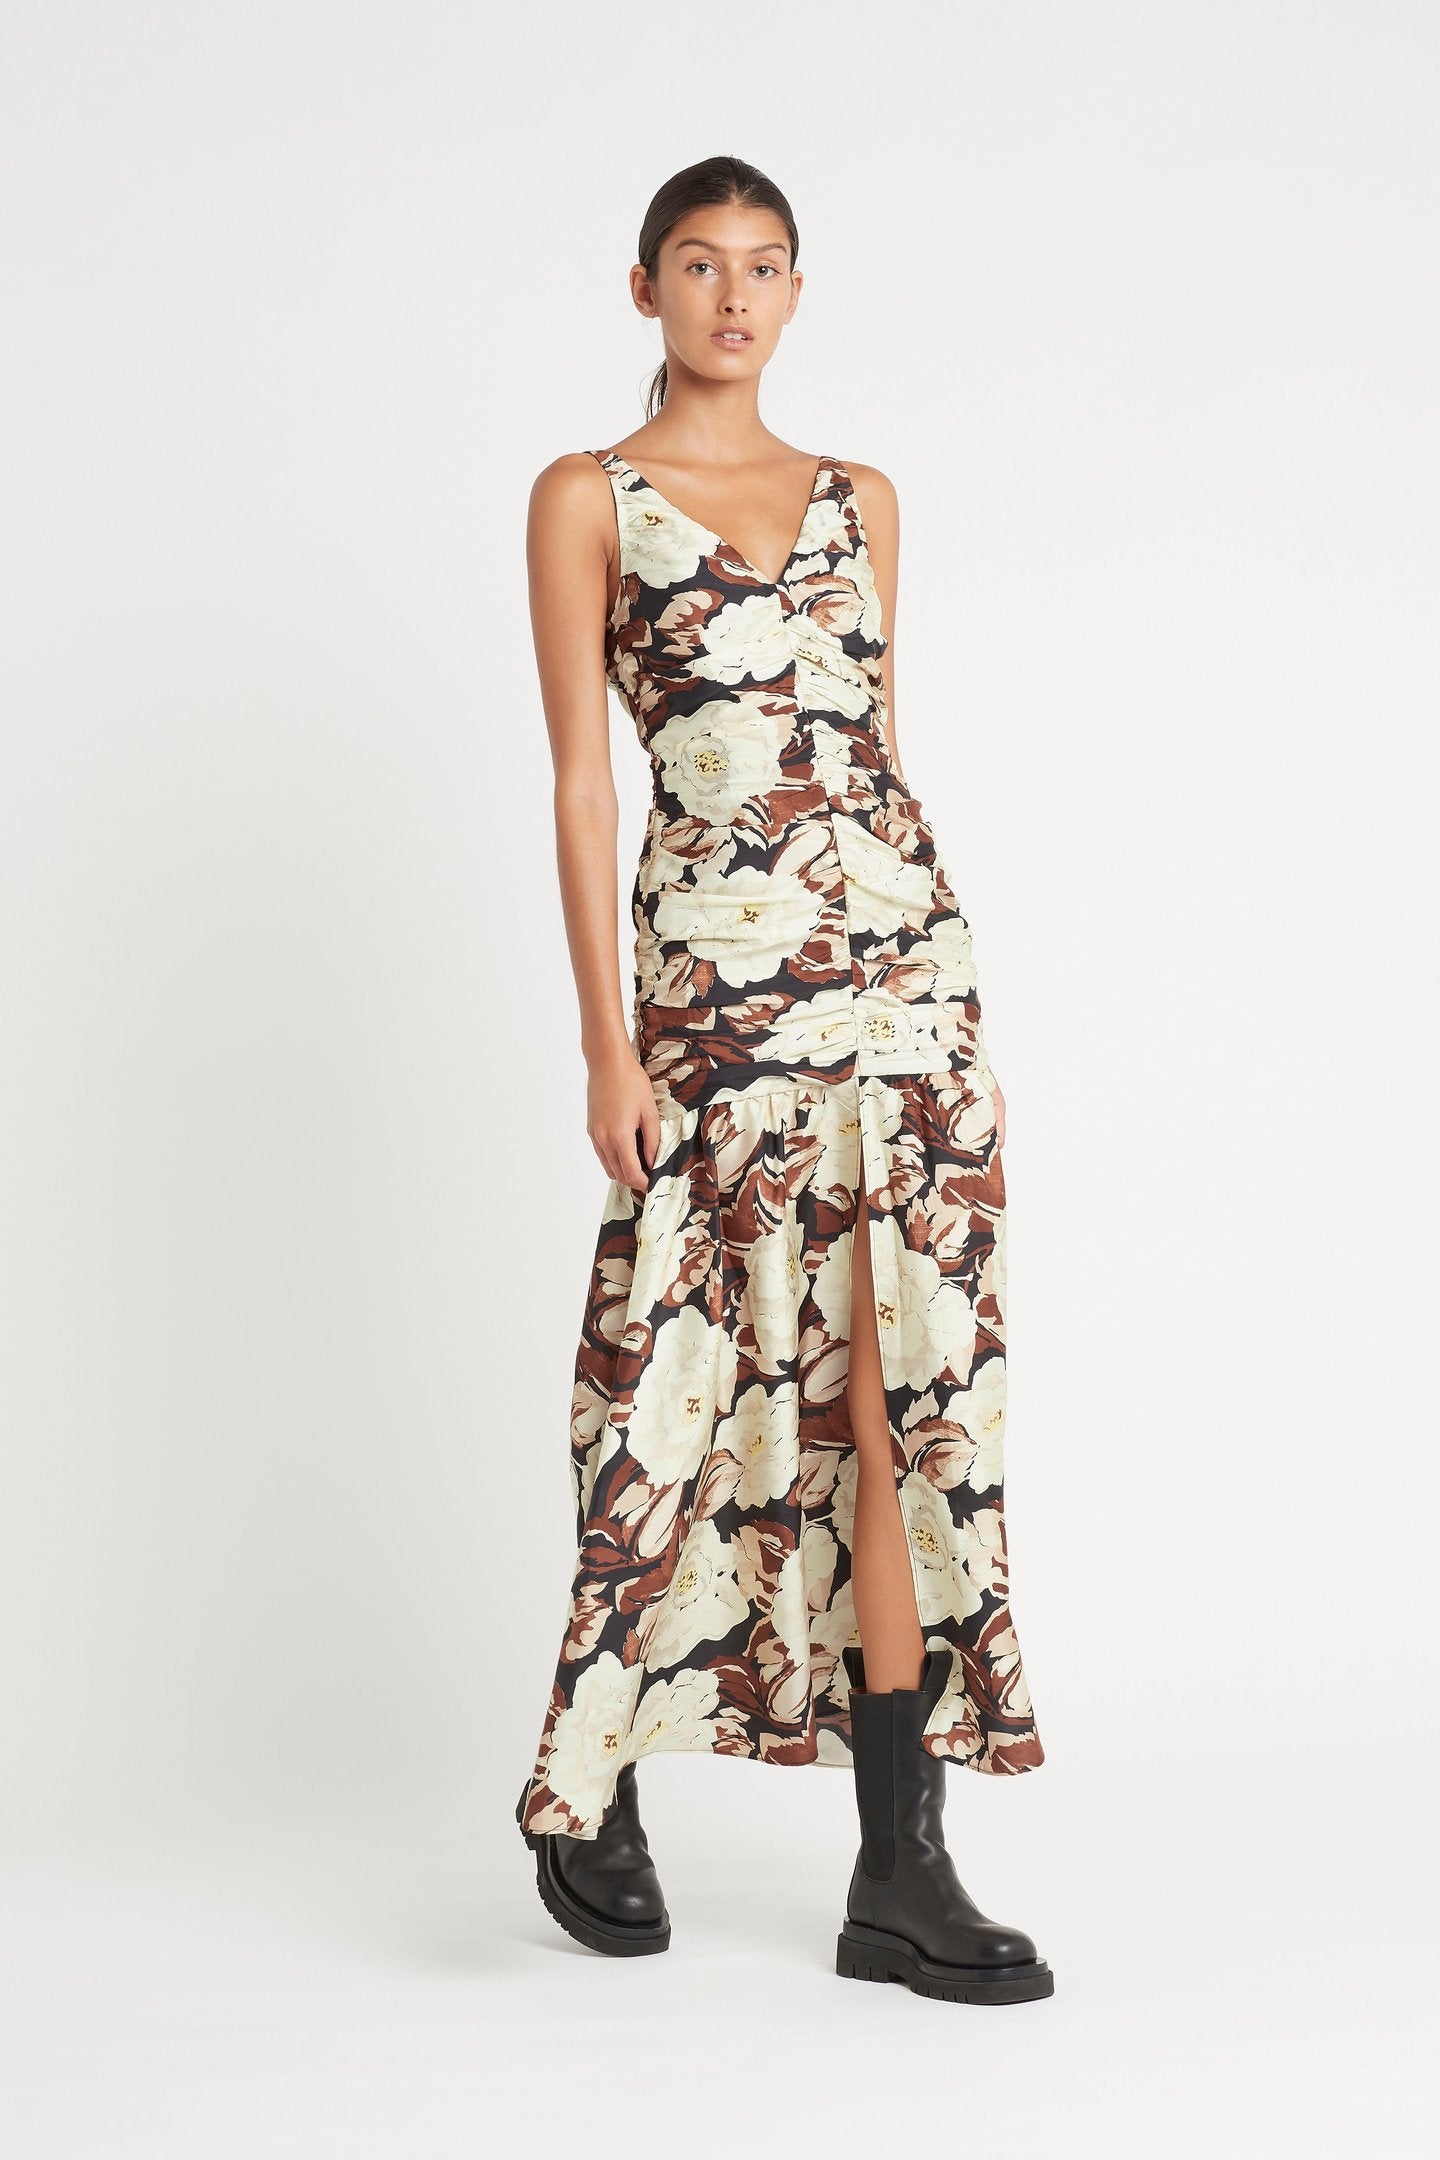 SIR - VIVIENNE GOWN - FLORAL (BYRON BAY) Full length view